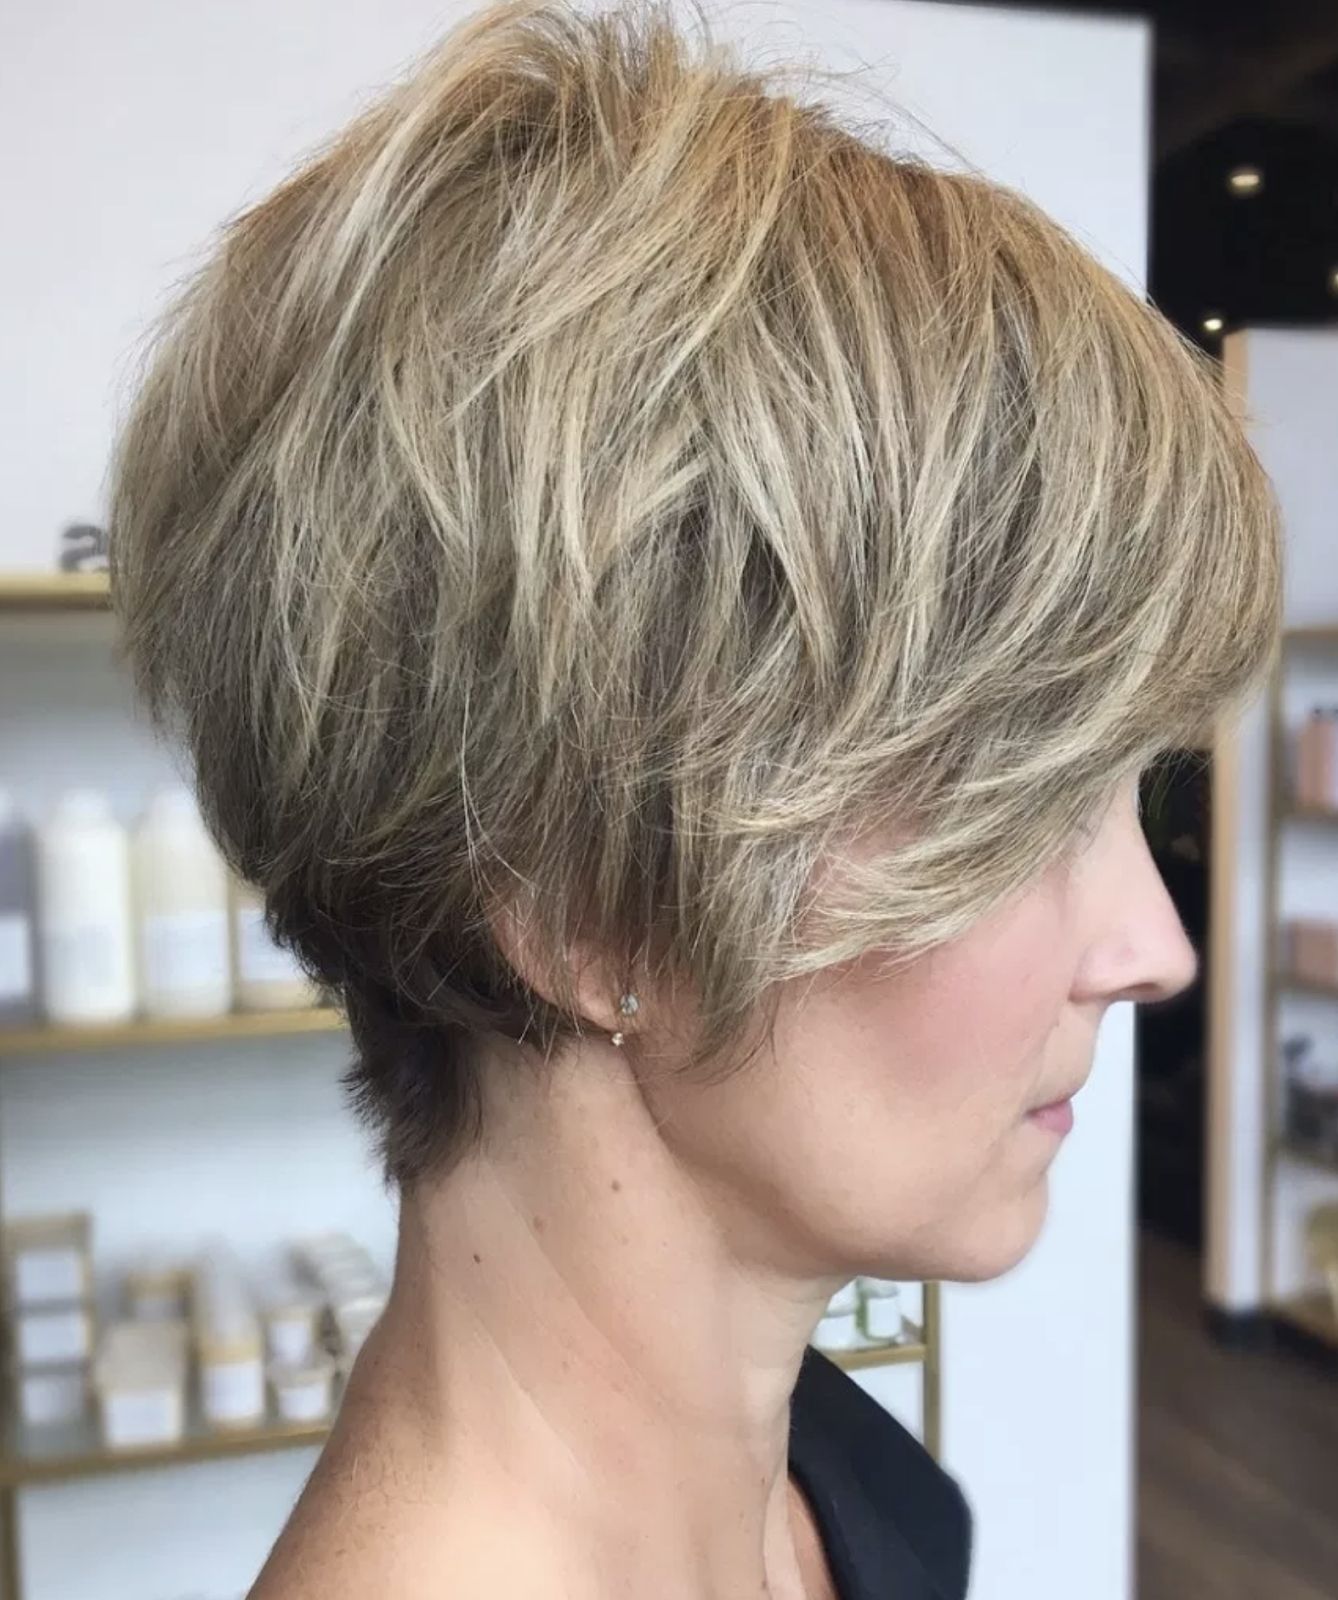 Latesthairstylepedia: Short Hairstyles For Women Over 40 Within Short Hairstyles For Over 40s (View 15 of 25)